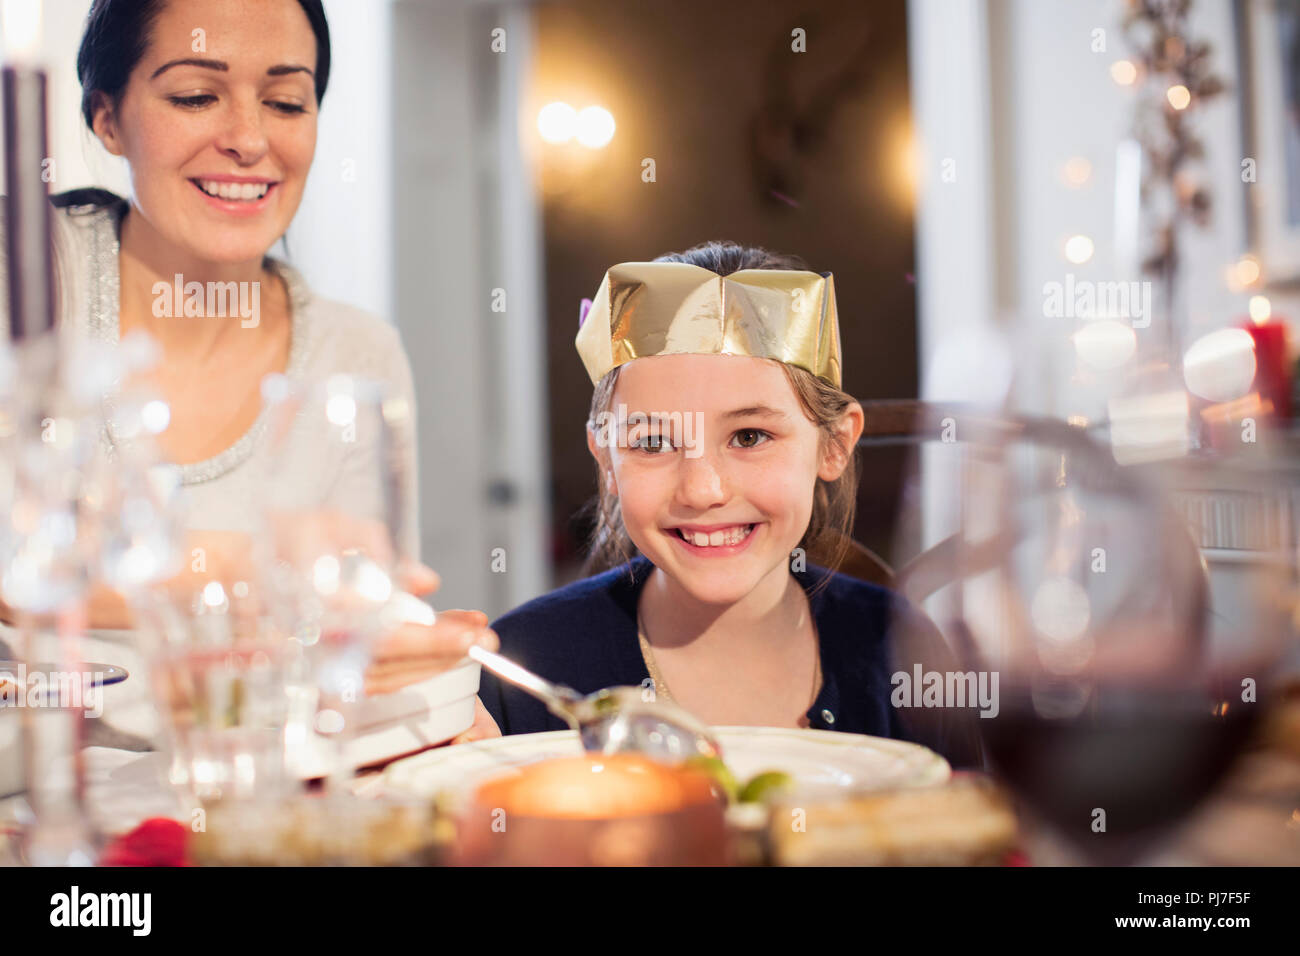 Smiling mother and daughter in paper crown enjoying Christmas dinner Banque D'Images